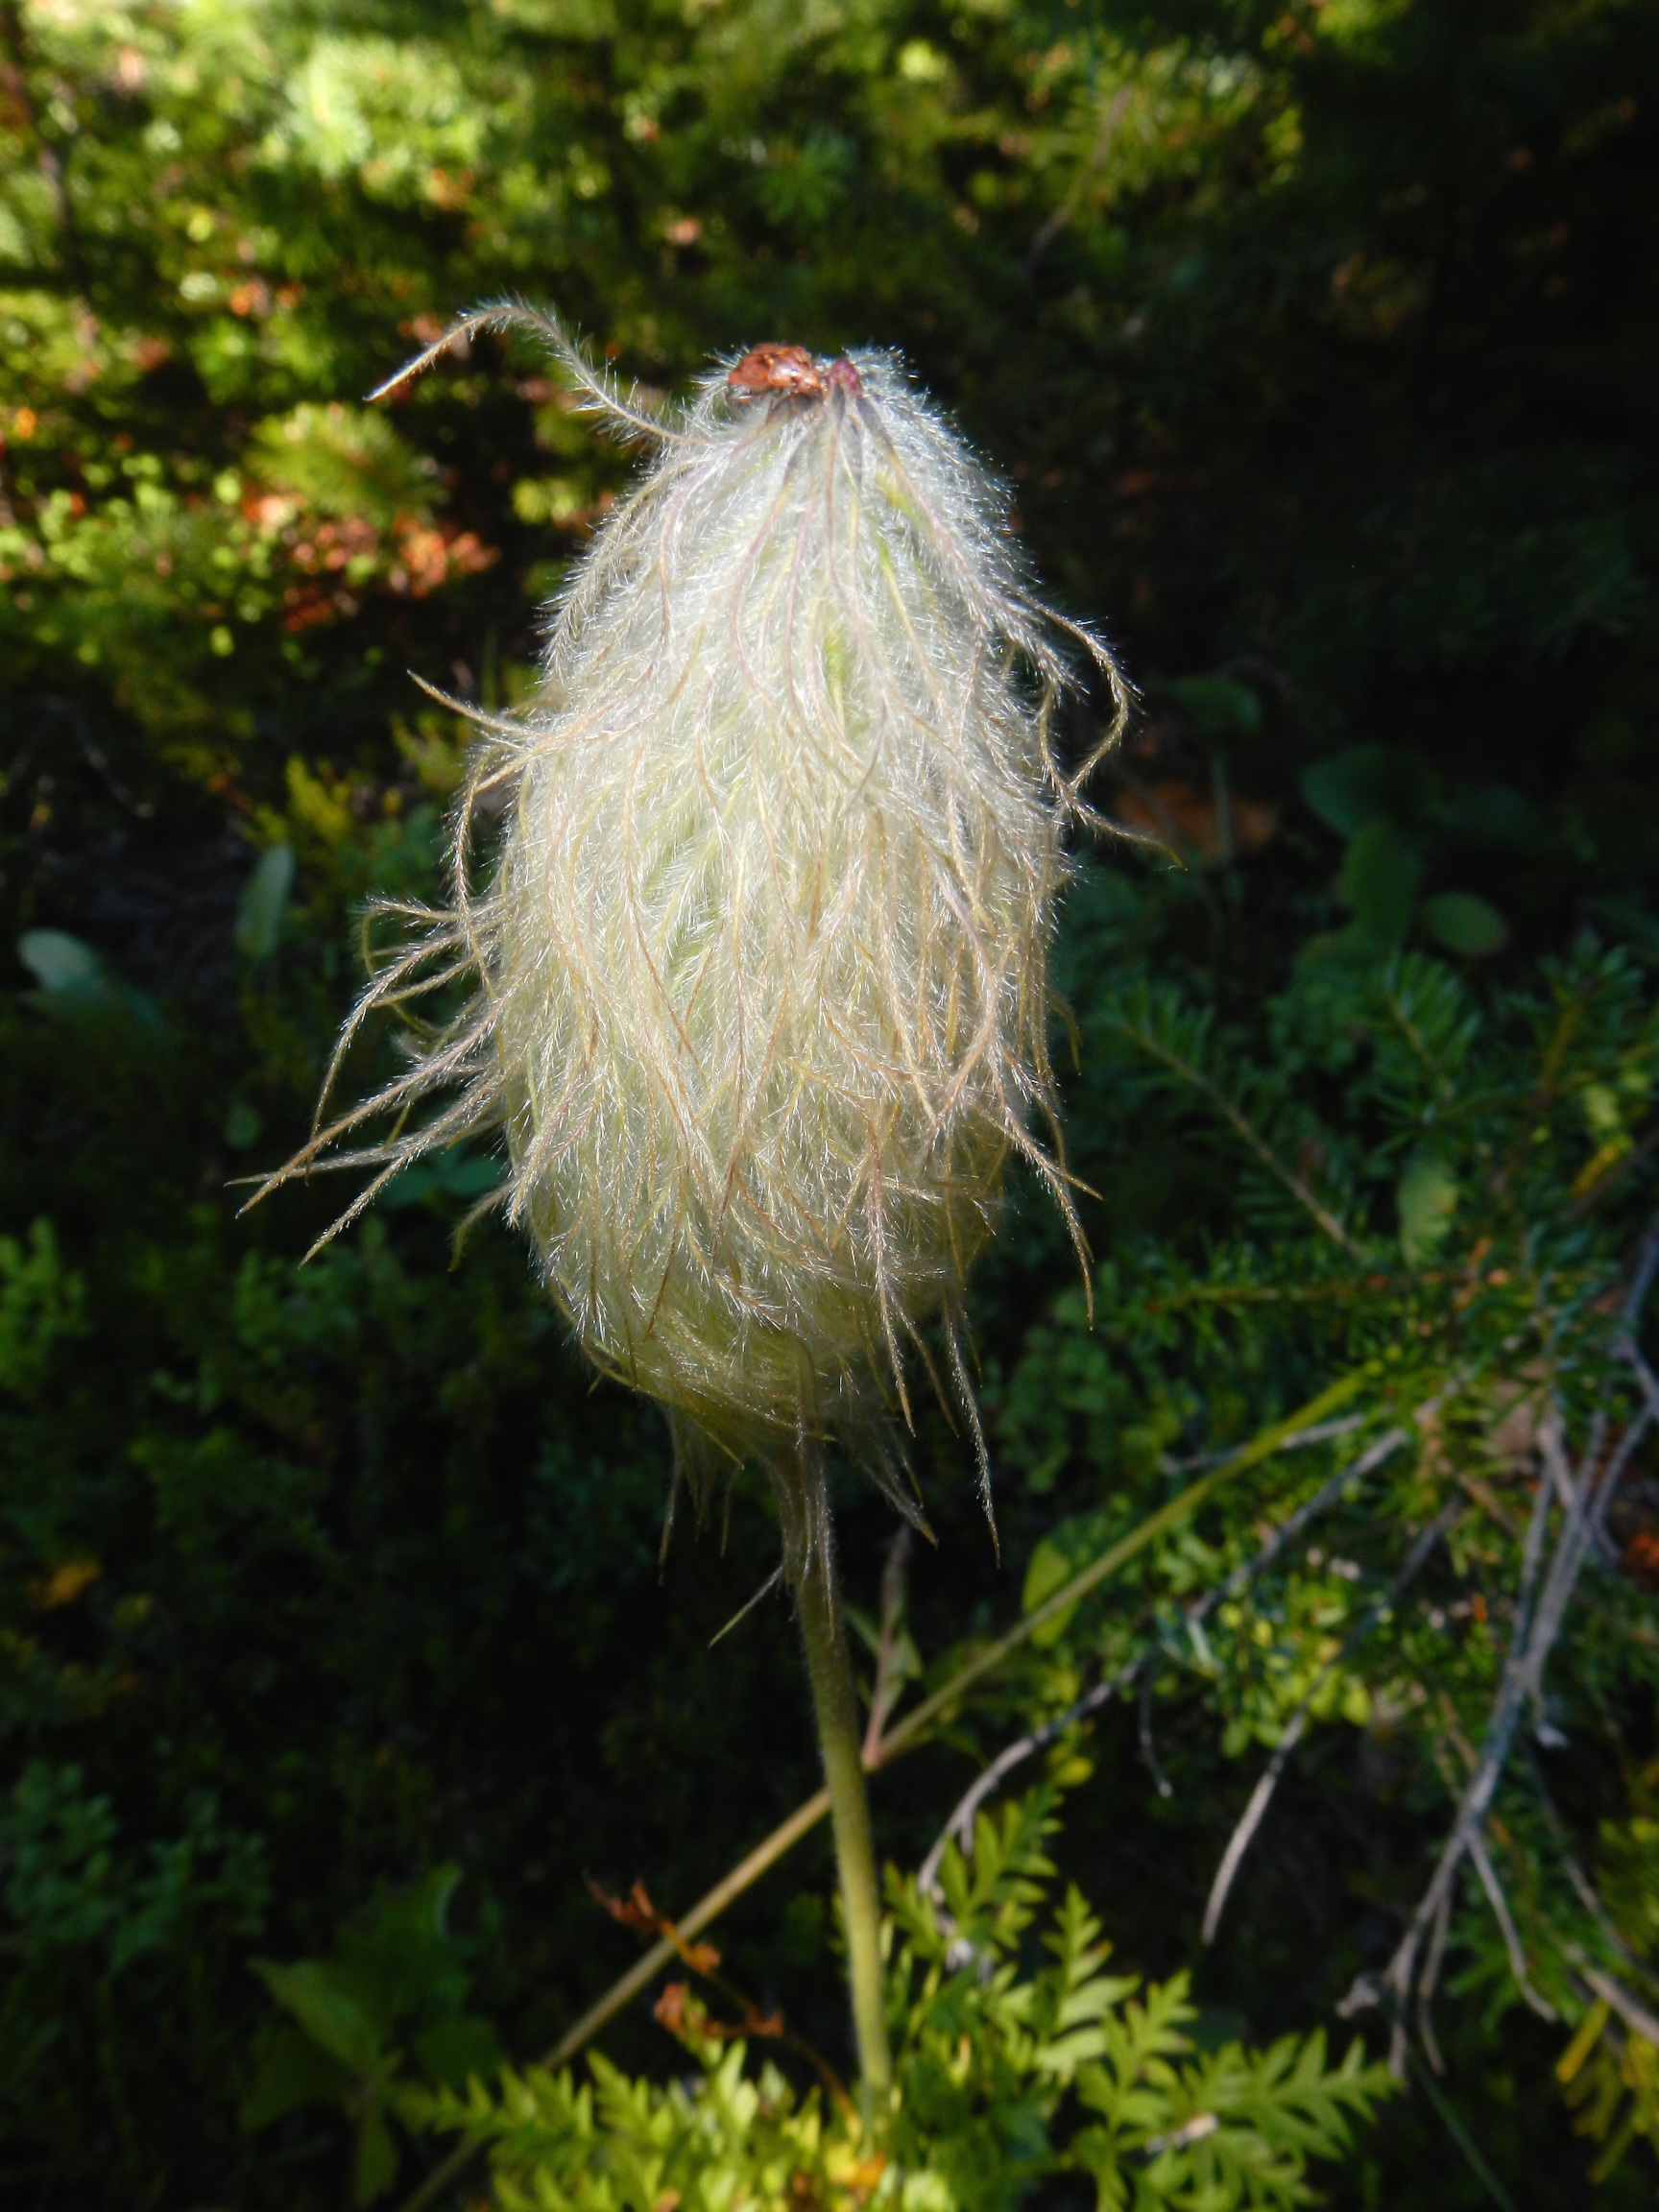  Clematis seeds, Peyto Lake, Icefields Parkway, Canada 